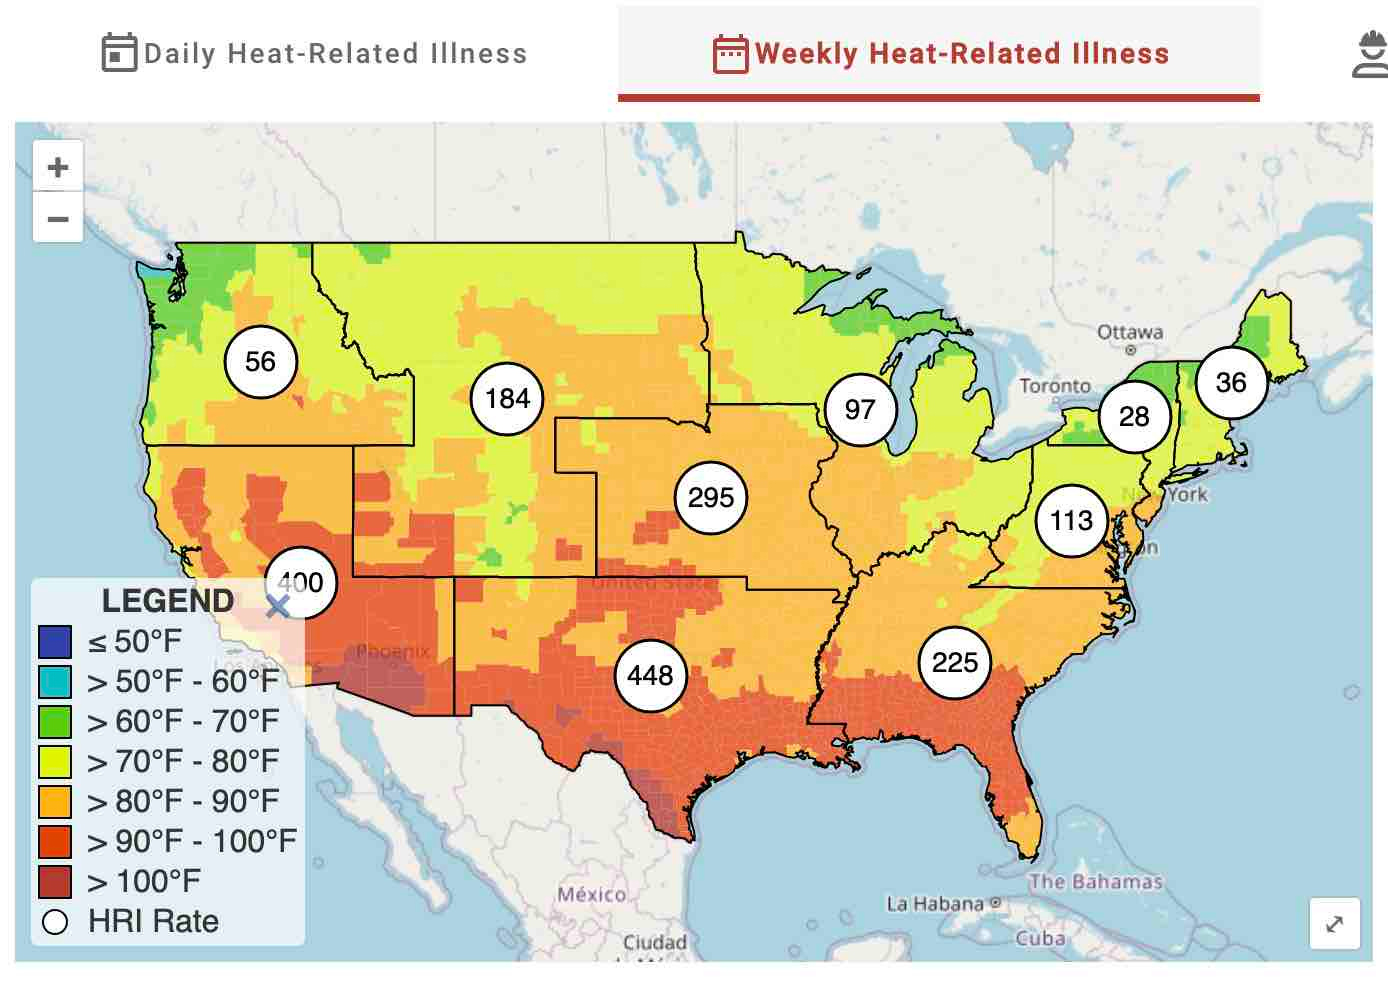 Heat poses significant and increasing risks to public health across the United States. Use this dashboard to explore your community’s heat exposure, related health outcomes, and assets that can protect people during heat events.